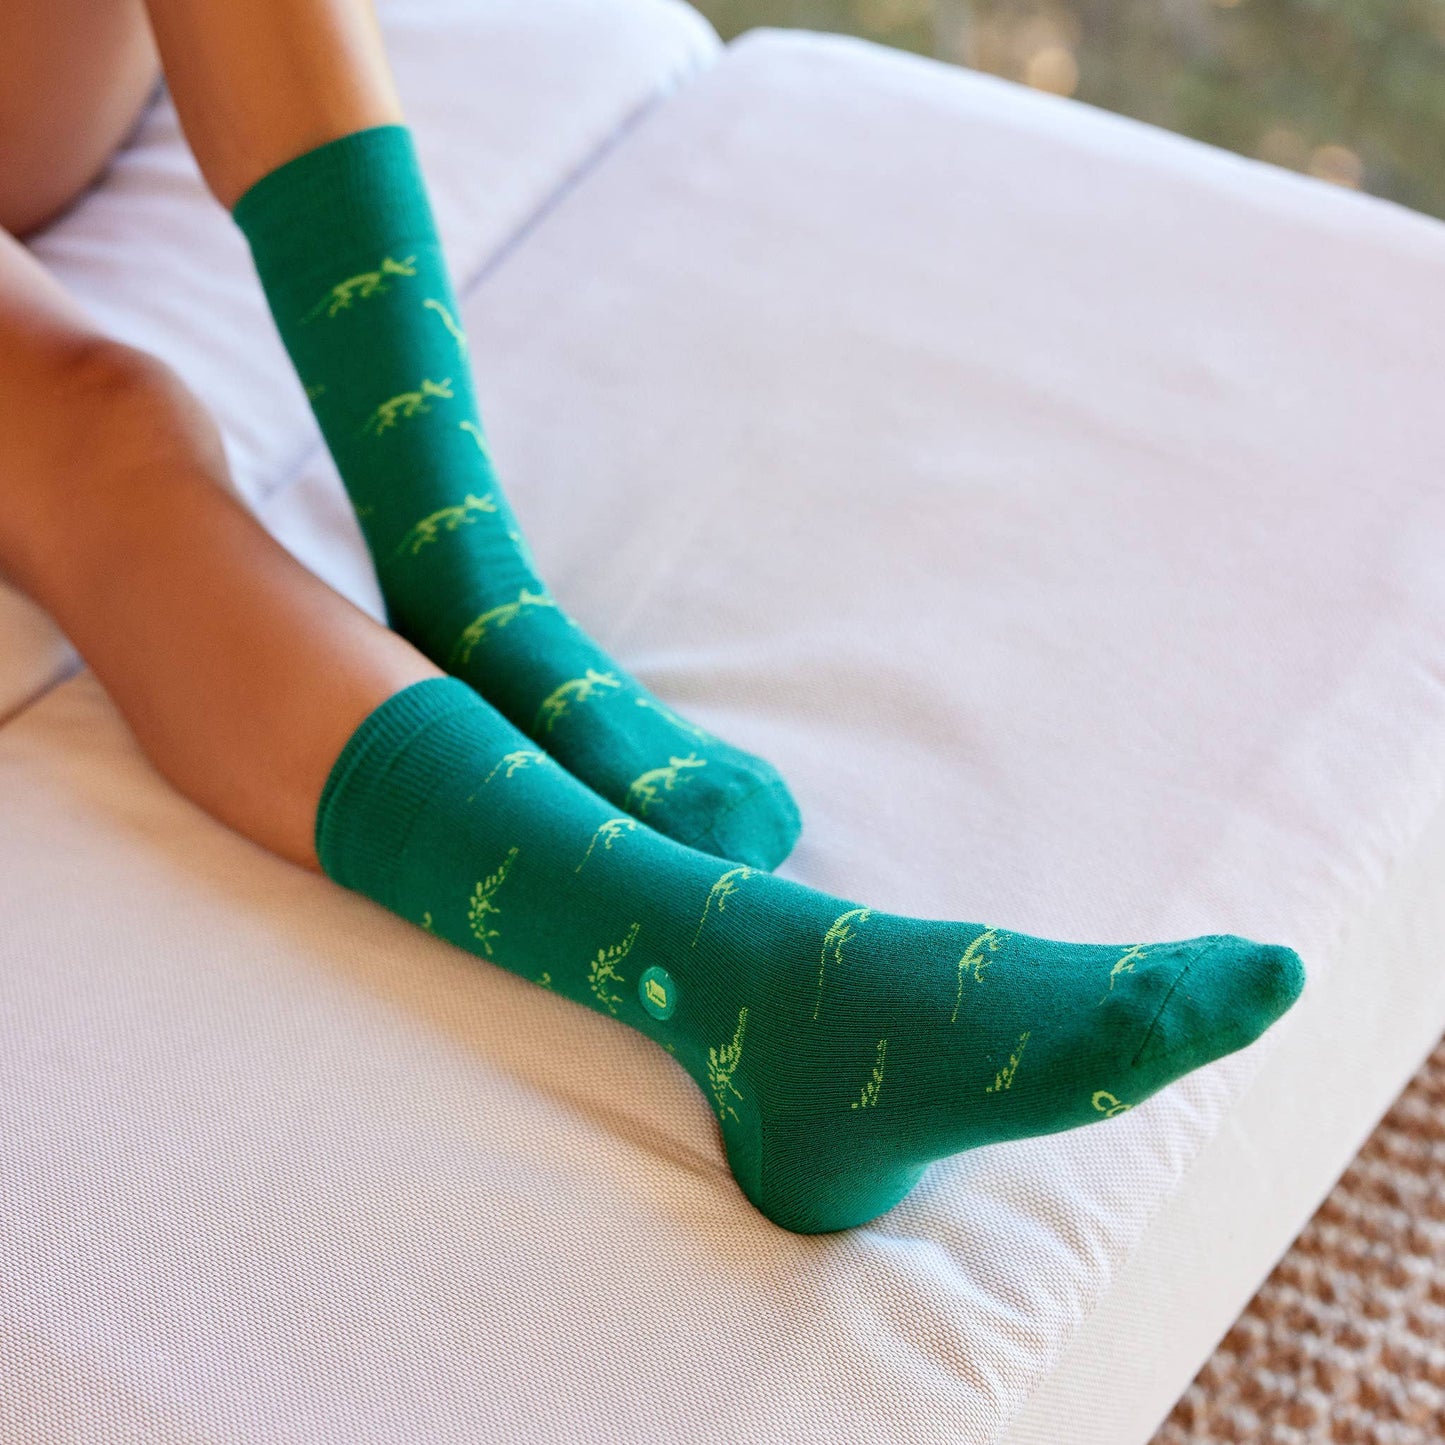 Conscious Step - Socks that Give Books  (Green Dinosaurs)  Conscious Step   -better made easy-eco-friendly-sustainable-gifting